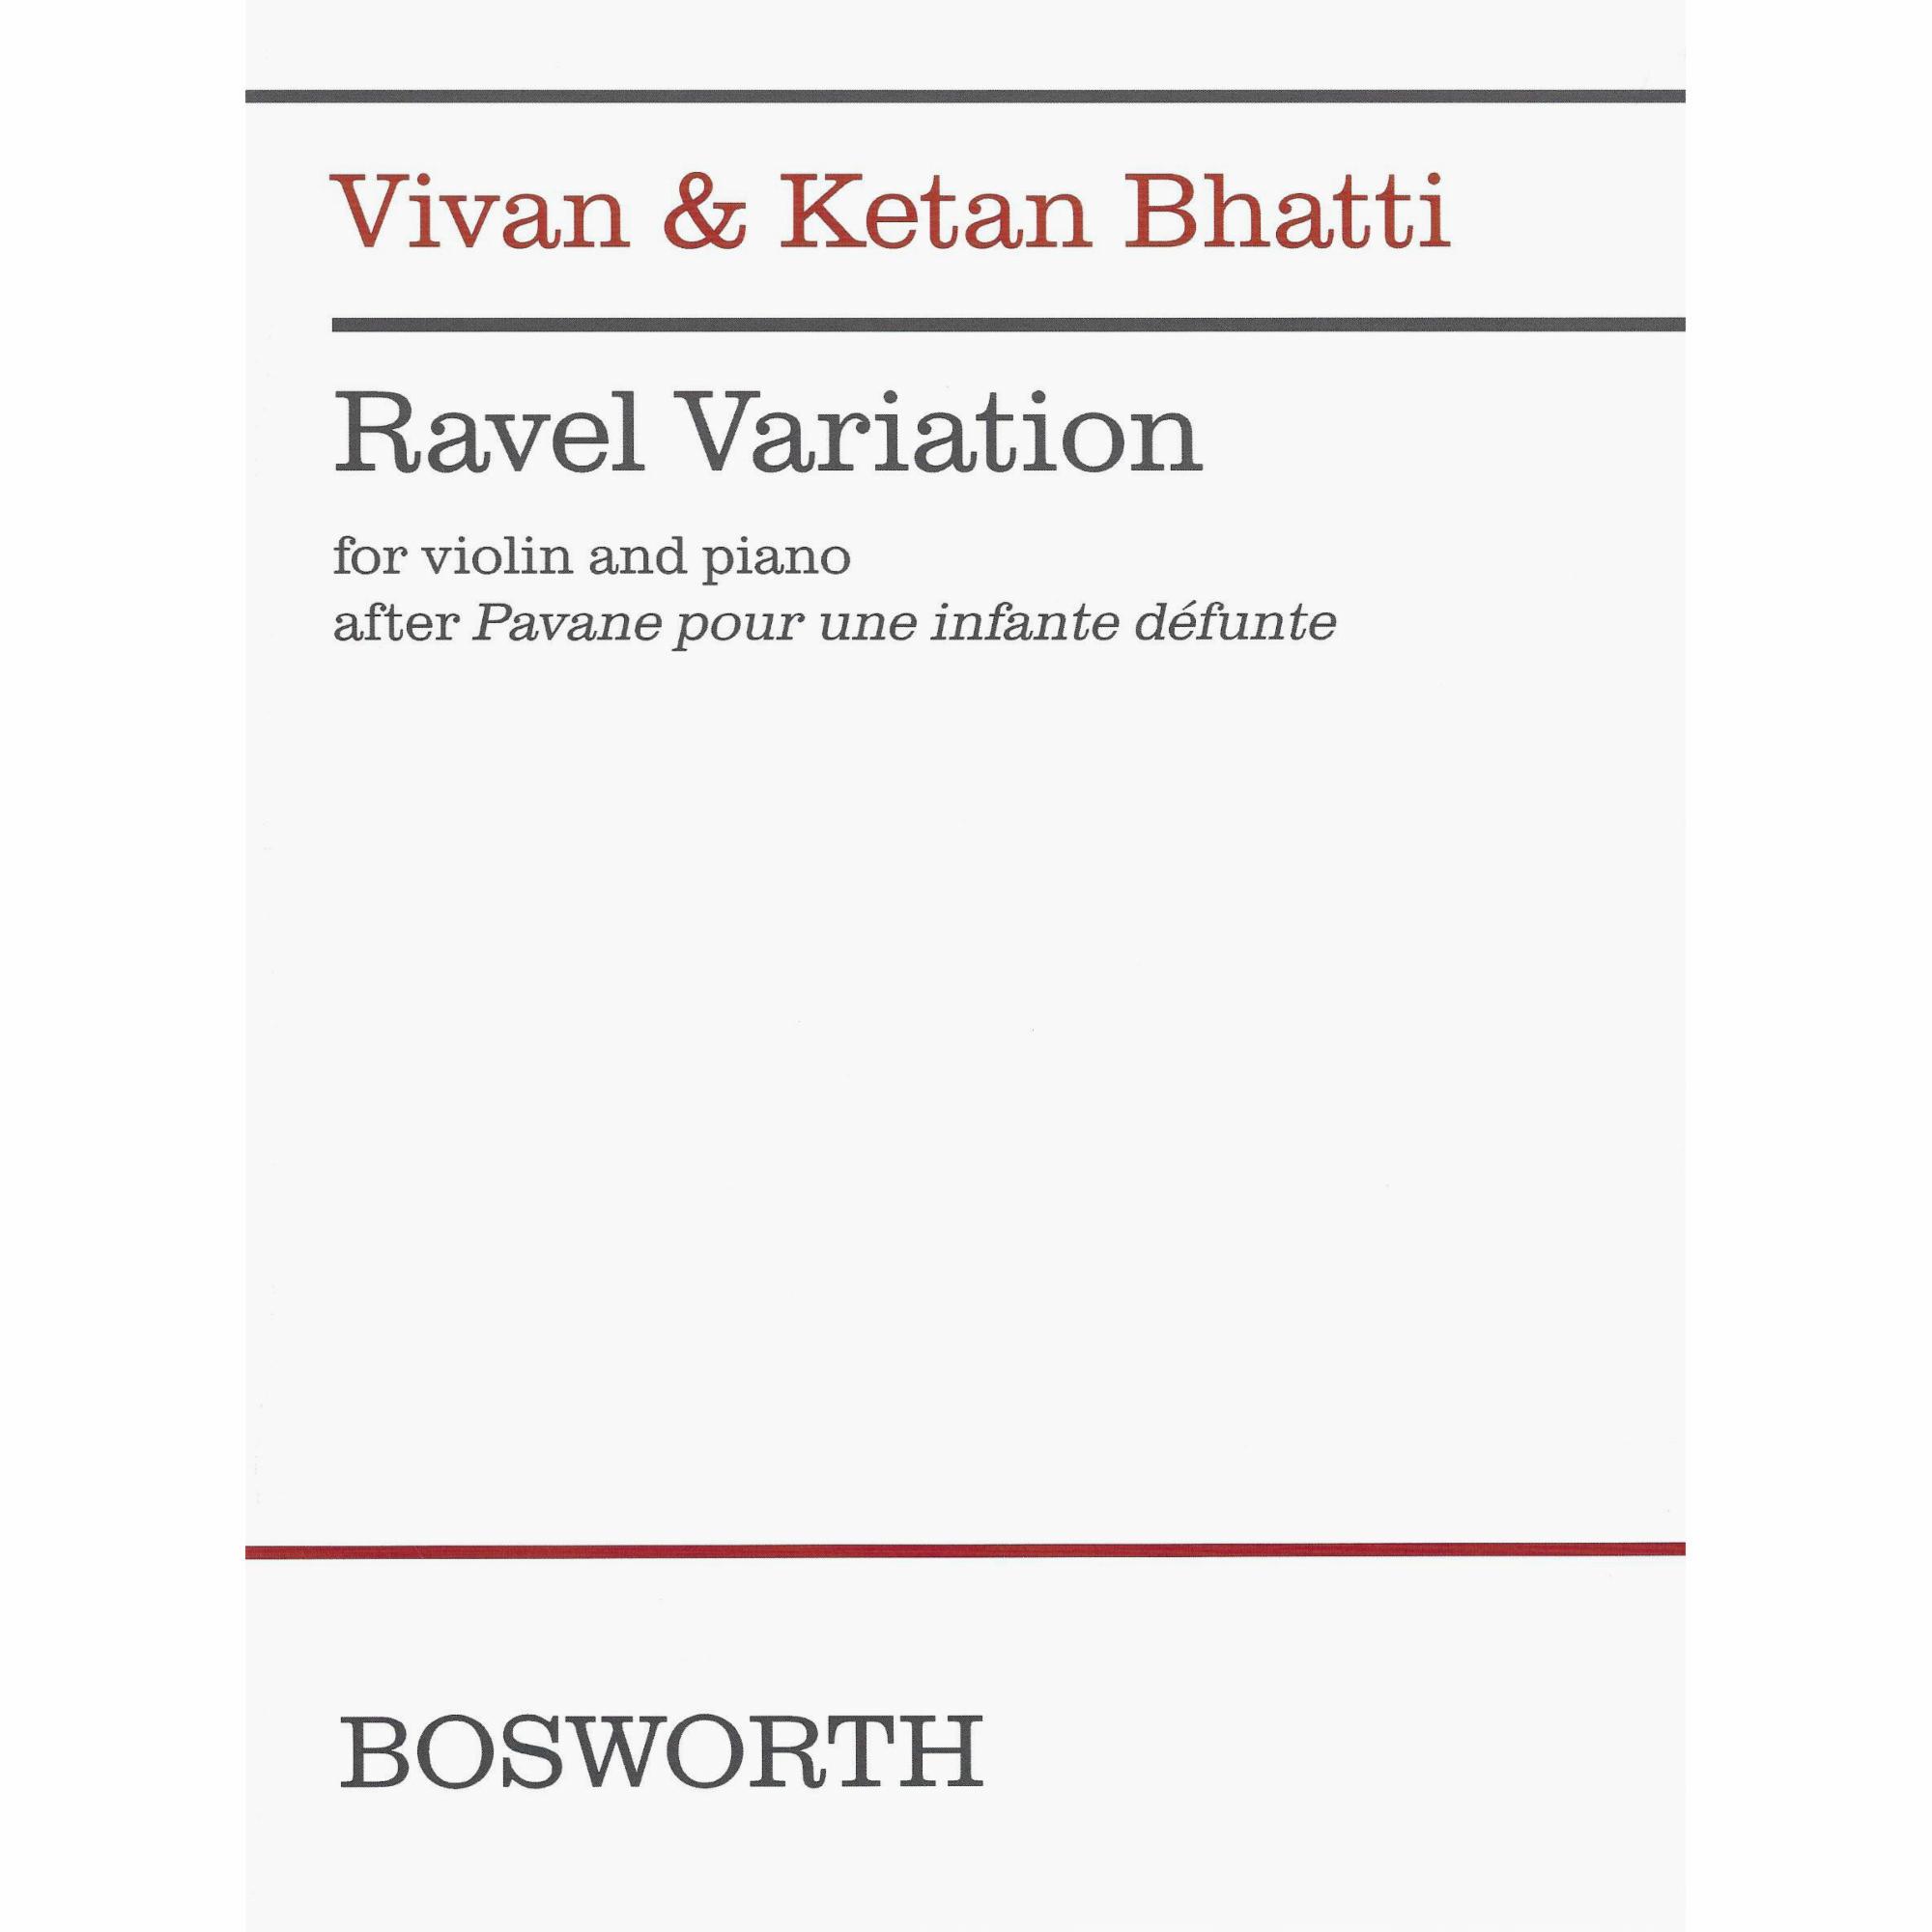 Bhatti -- Ravel Variation for Violin and Piano